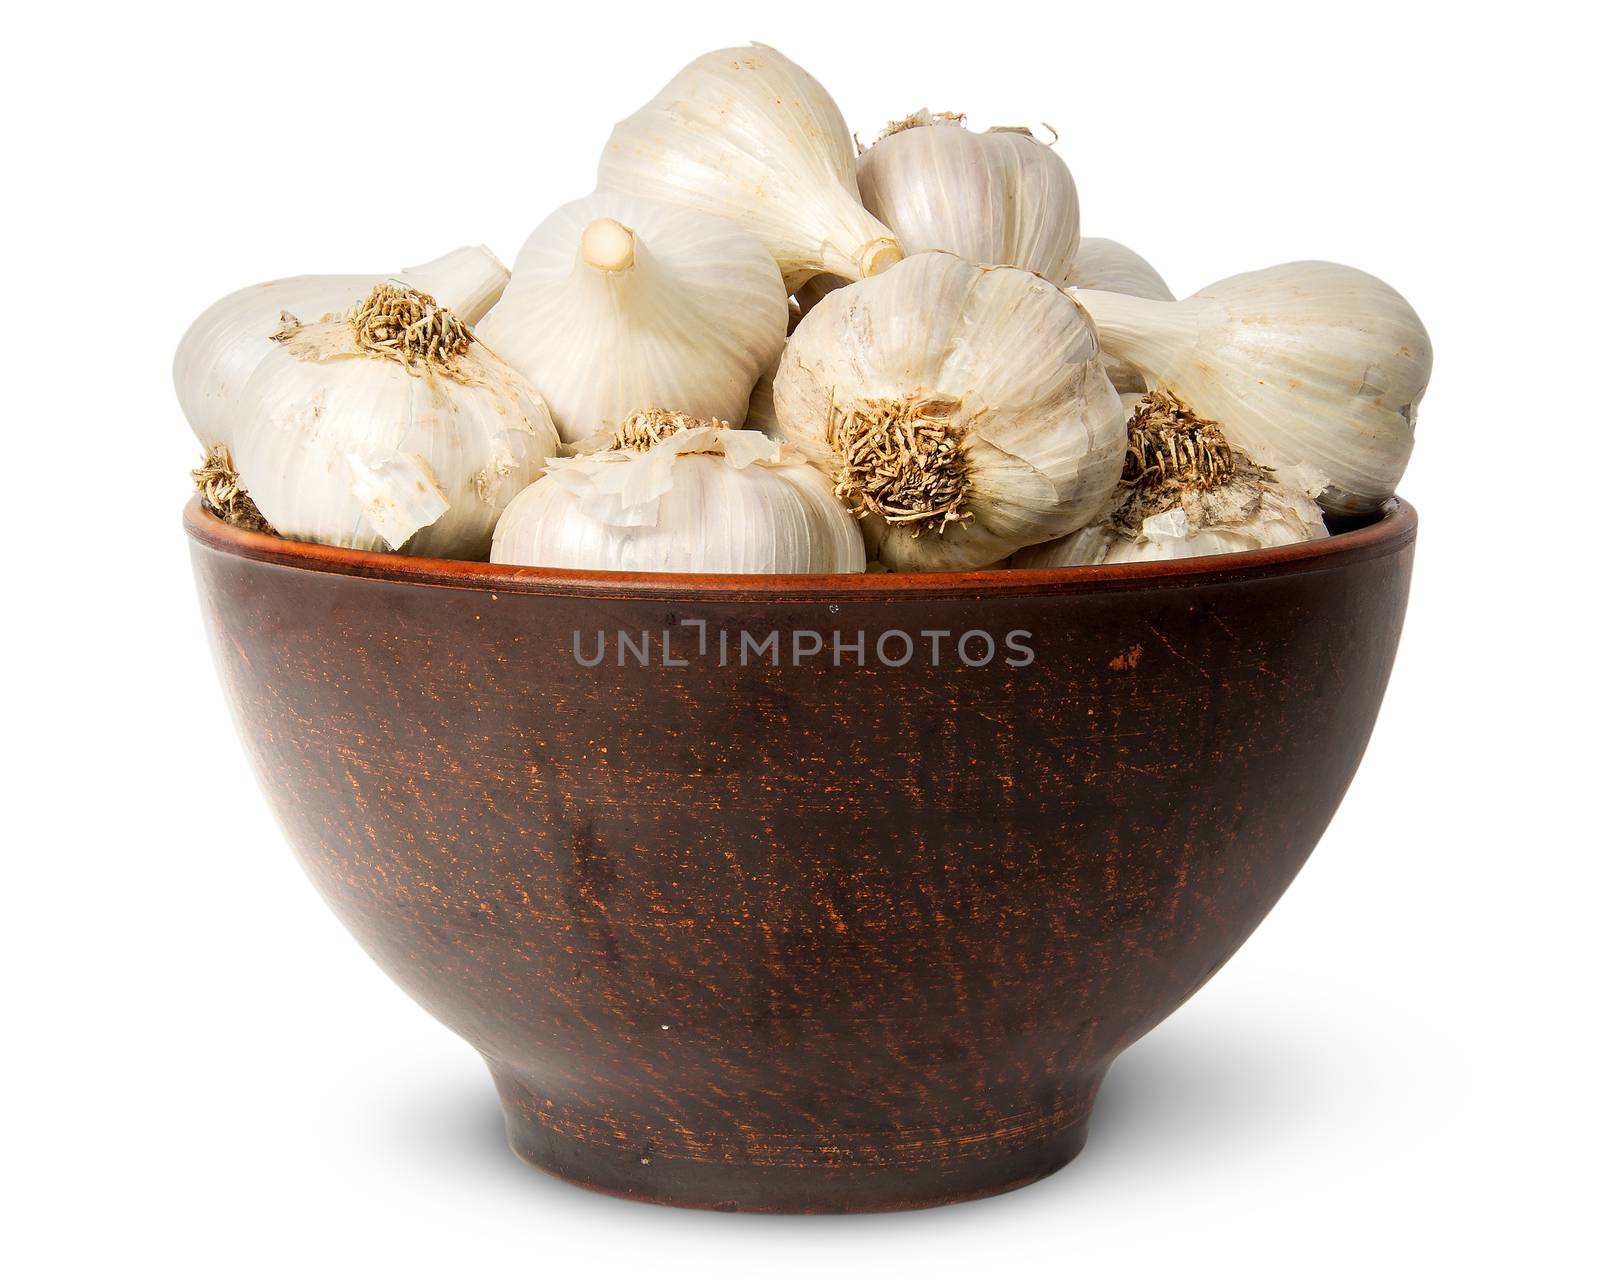 In front whole head of garlic in ceramic bowl by Cipariss